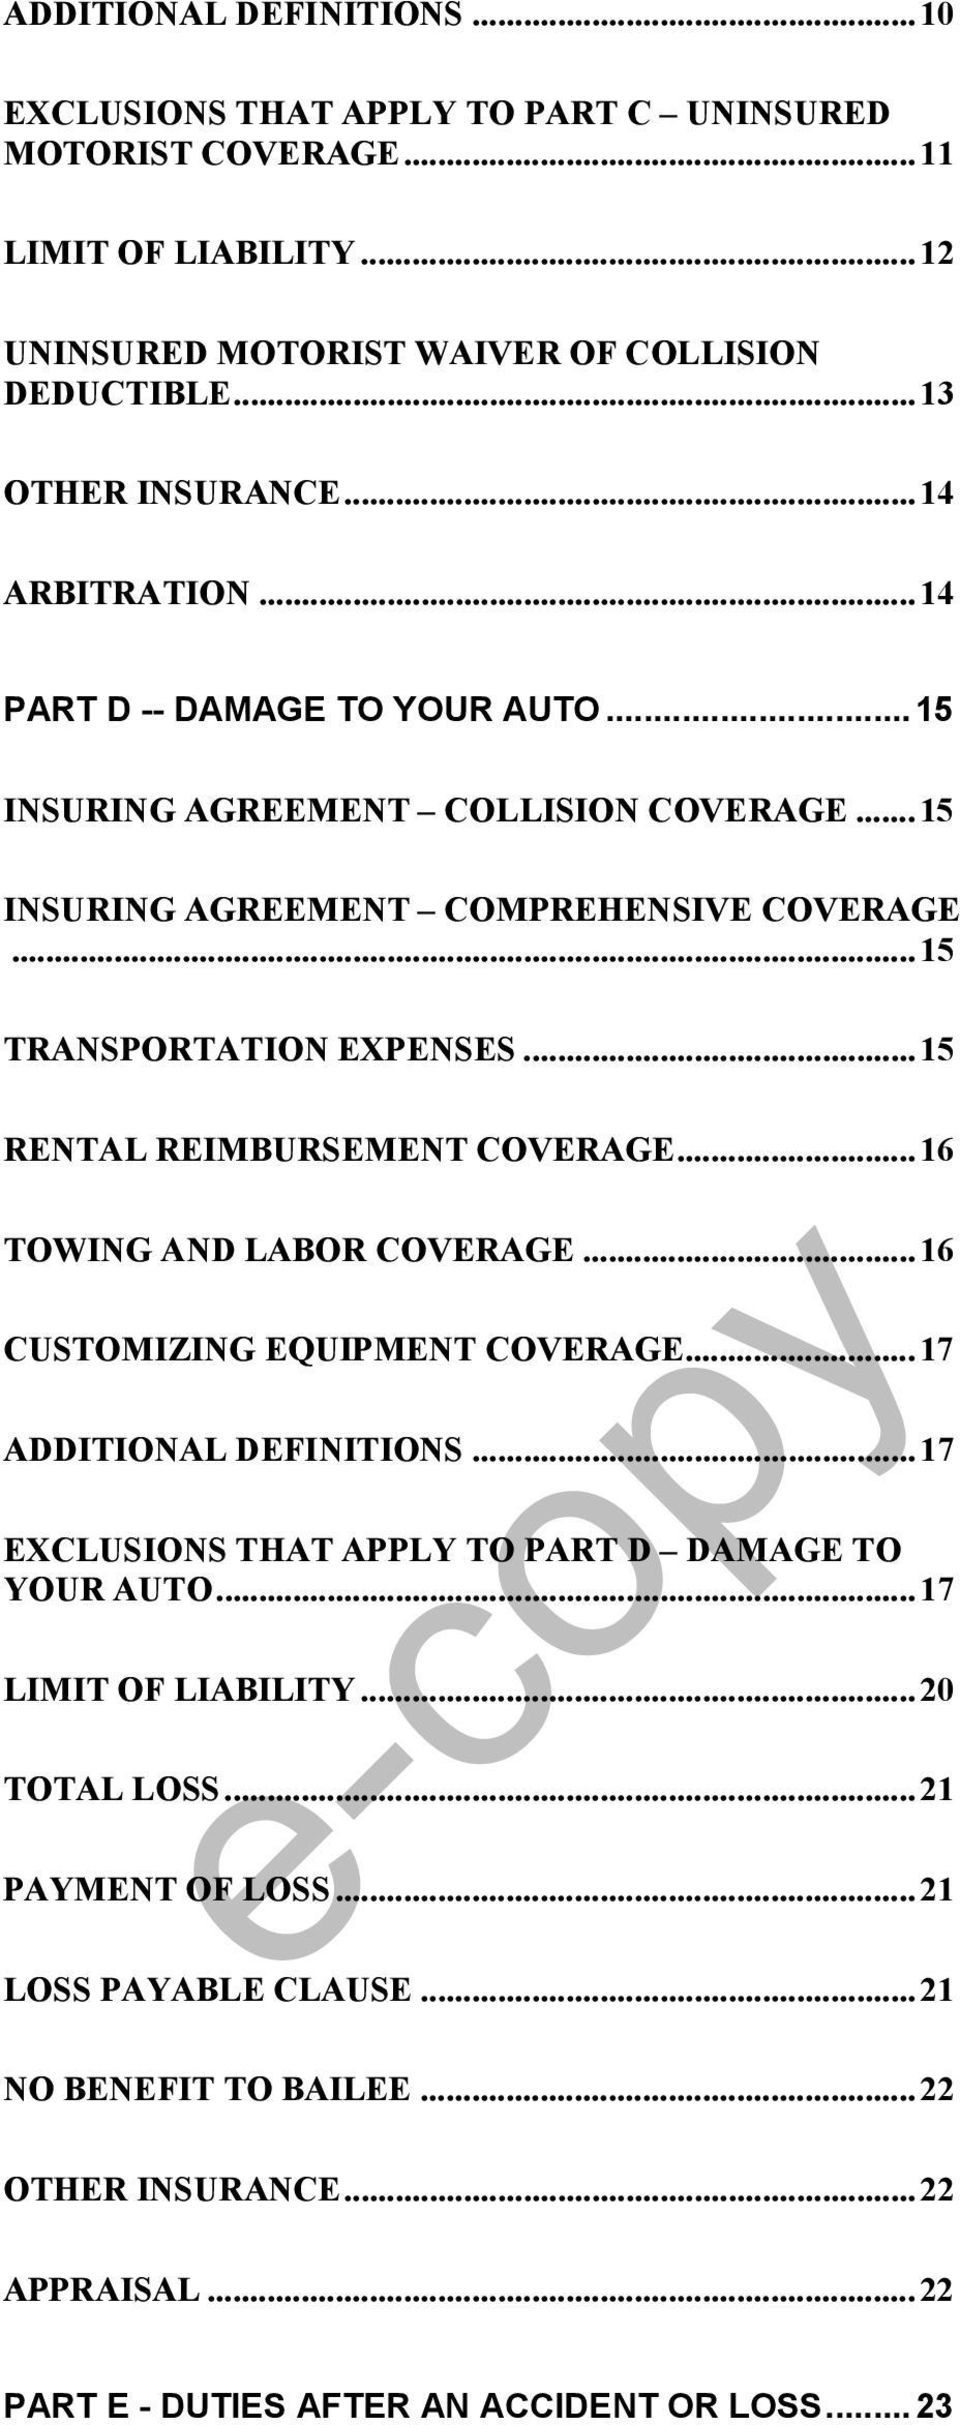 .. 15 RENTAL REIMBURSEMENT COVERAGE... 16 TOWING AND LABOR COVERAGE... 16 CUSTOMIZING EQUIPMENT COVERAGE... 17 ADDITIONAL DEFINITIONS... 17 EXCLUSIONS THAT APPLY TO PART D DAMAGE TO YOUR AUTO.